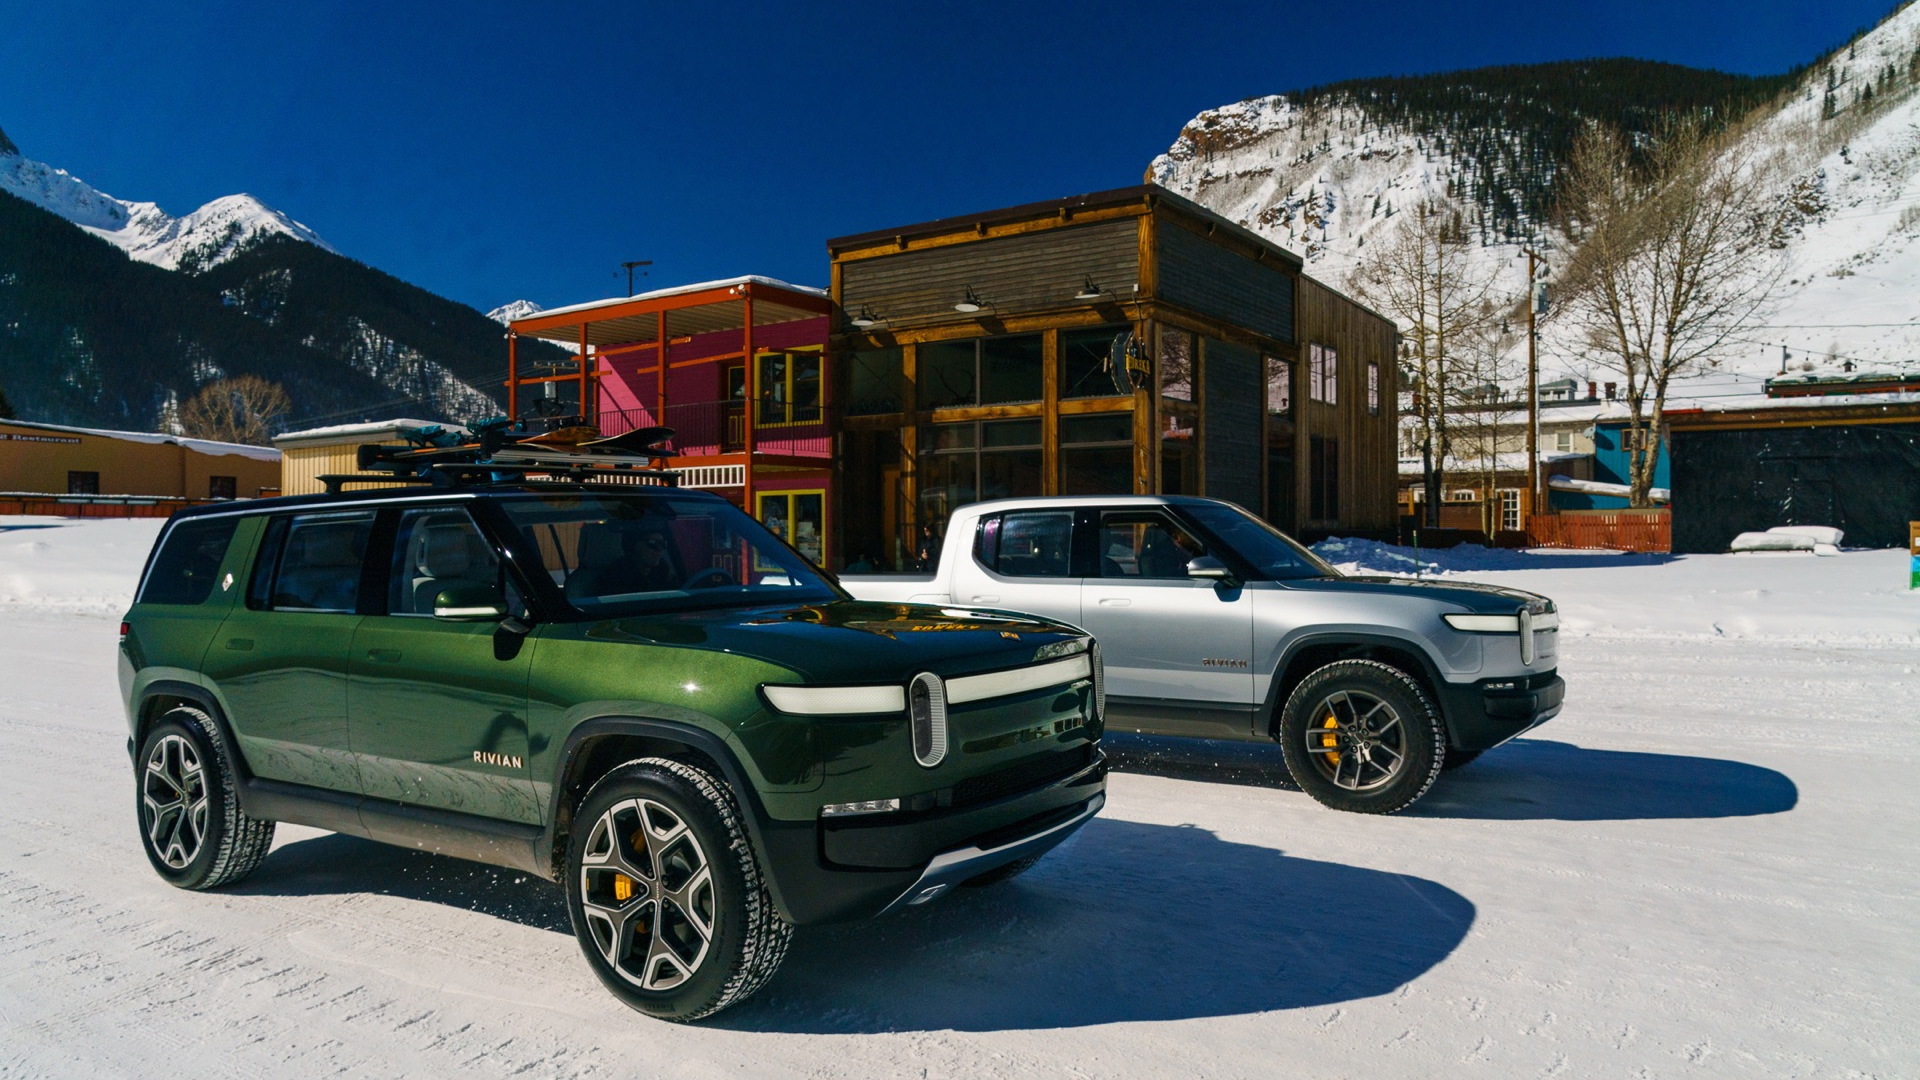 2022 Rivian R1T and R1S: Both electric trucks top 300 miles of EPA range